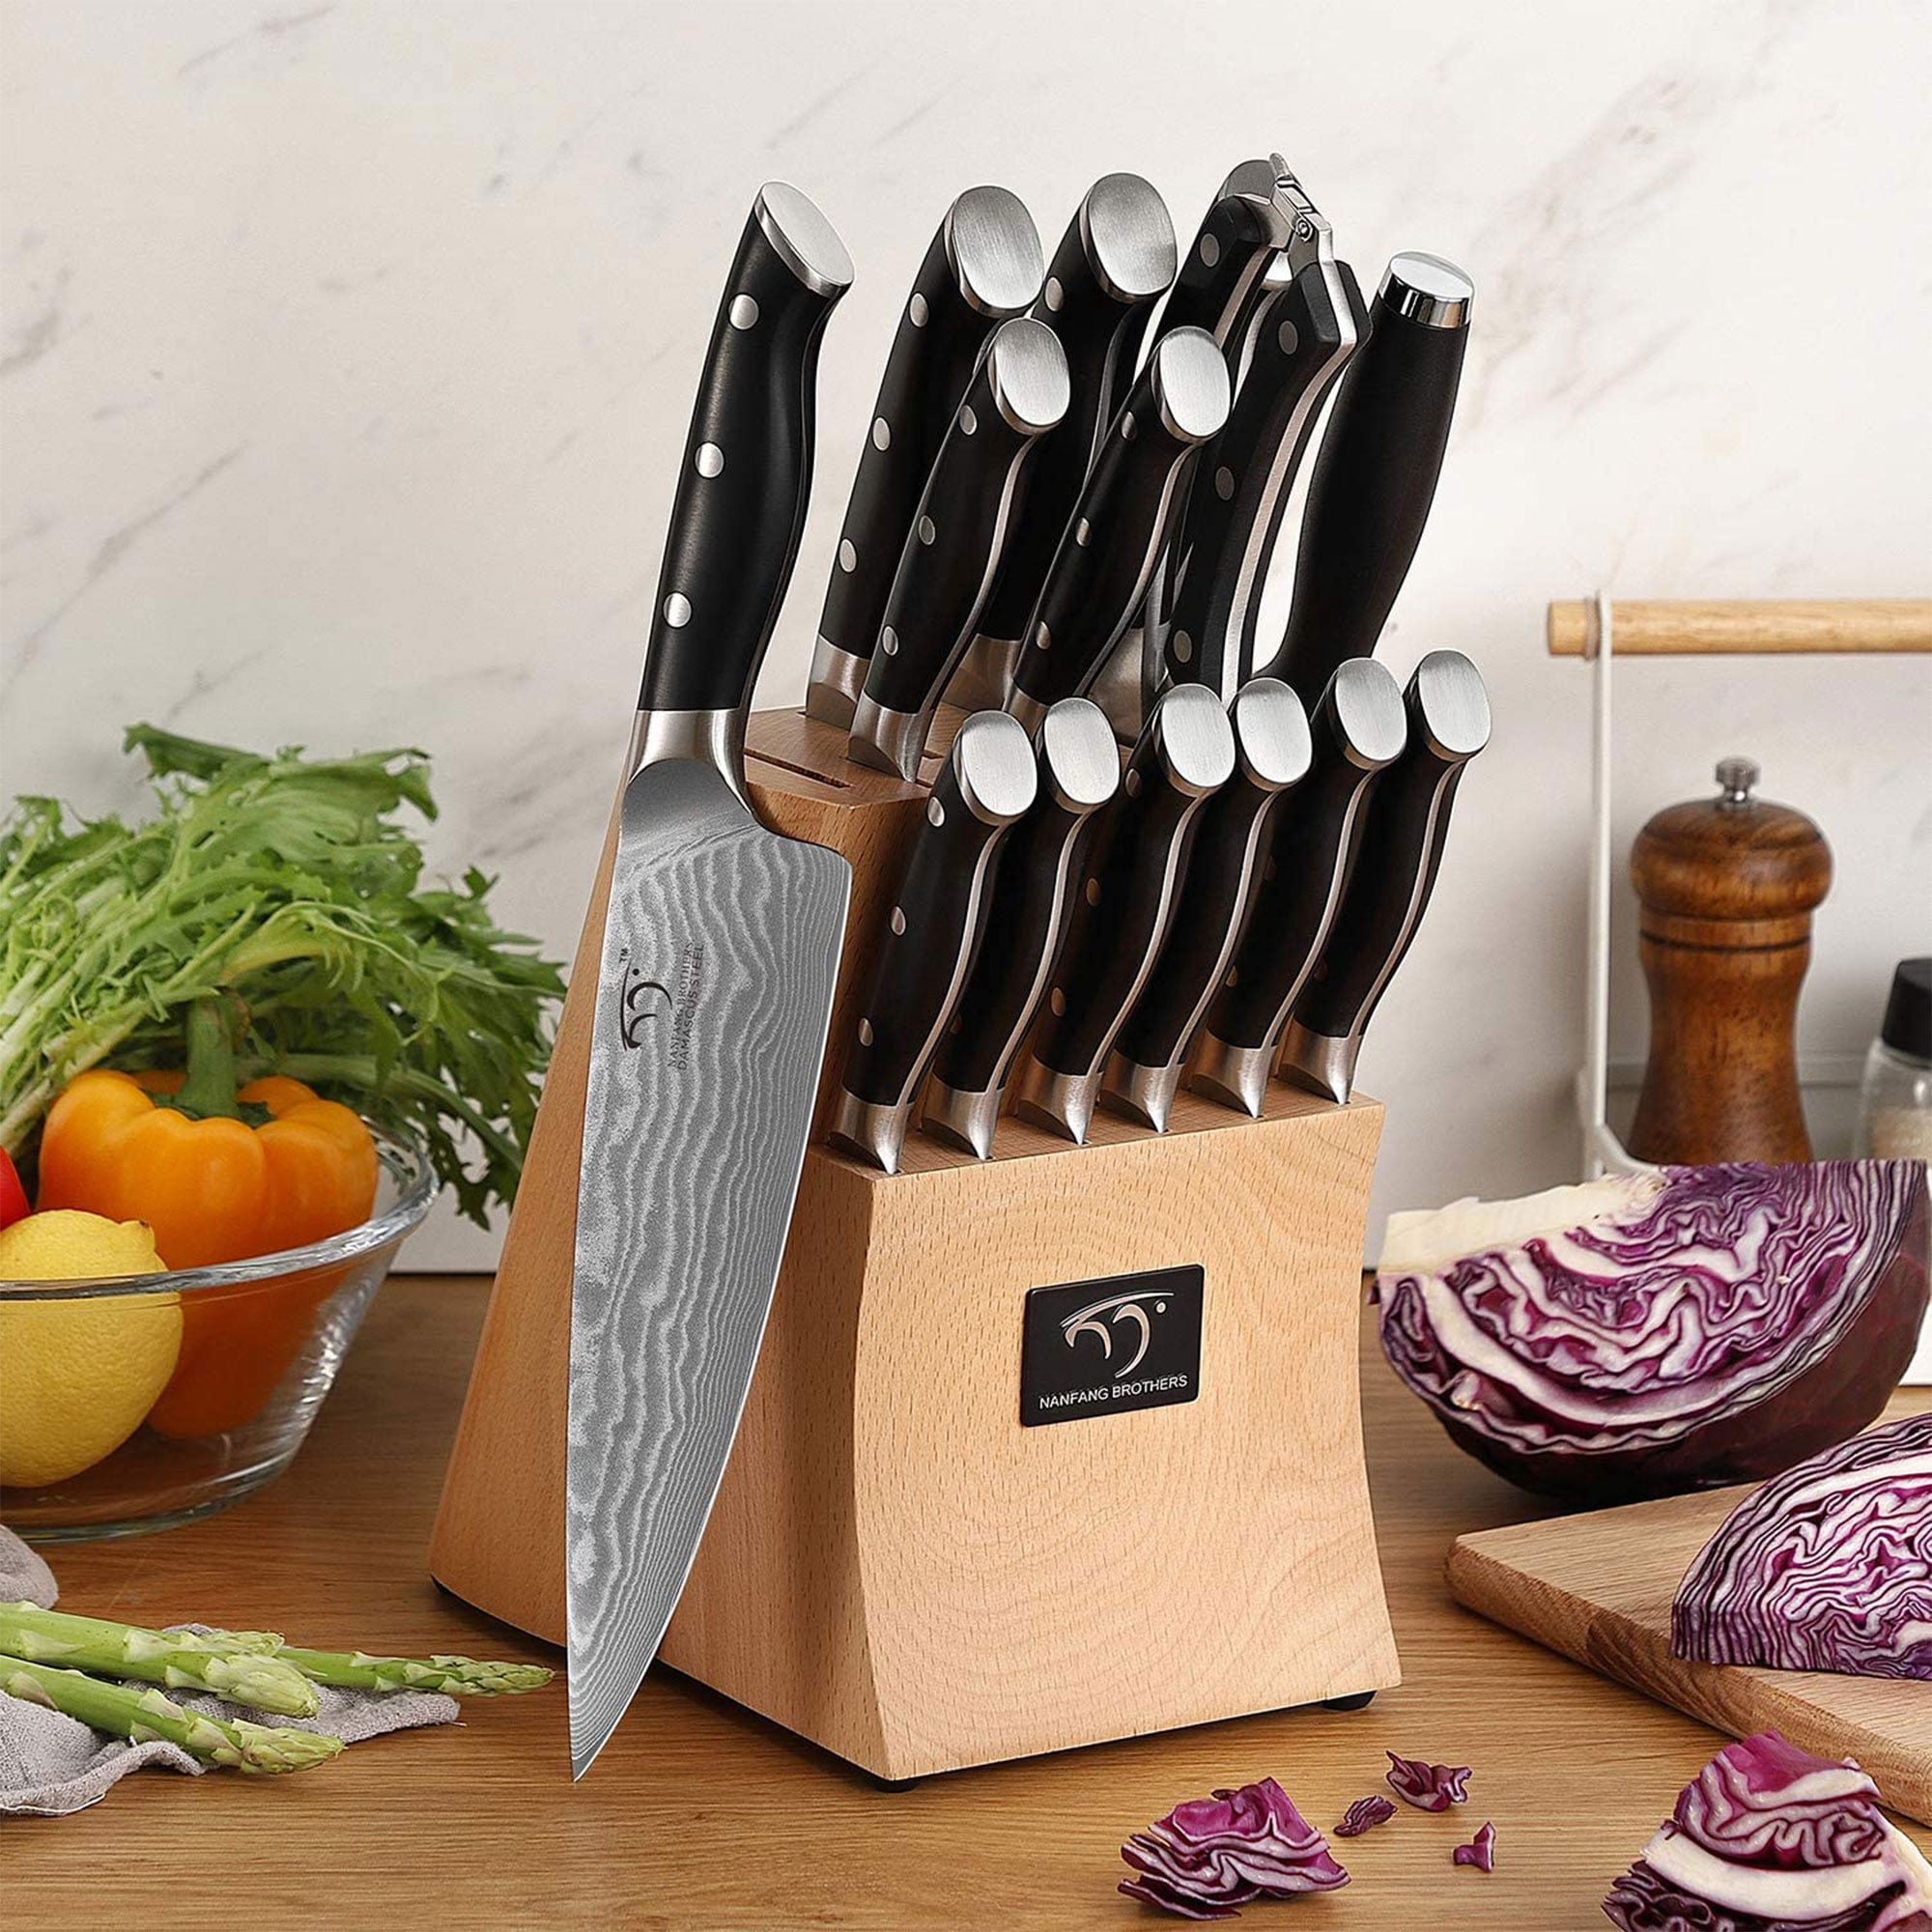  NANFANG BROTHERS 15-Piece Damascus Knife Set With Ergonomic  Handle and Disconnect-Type Block: Home & Kitchen